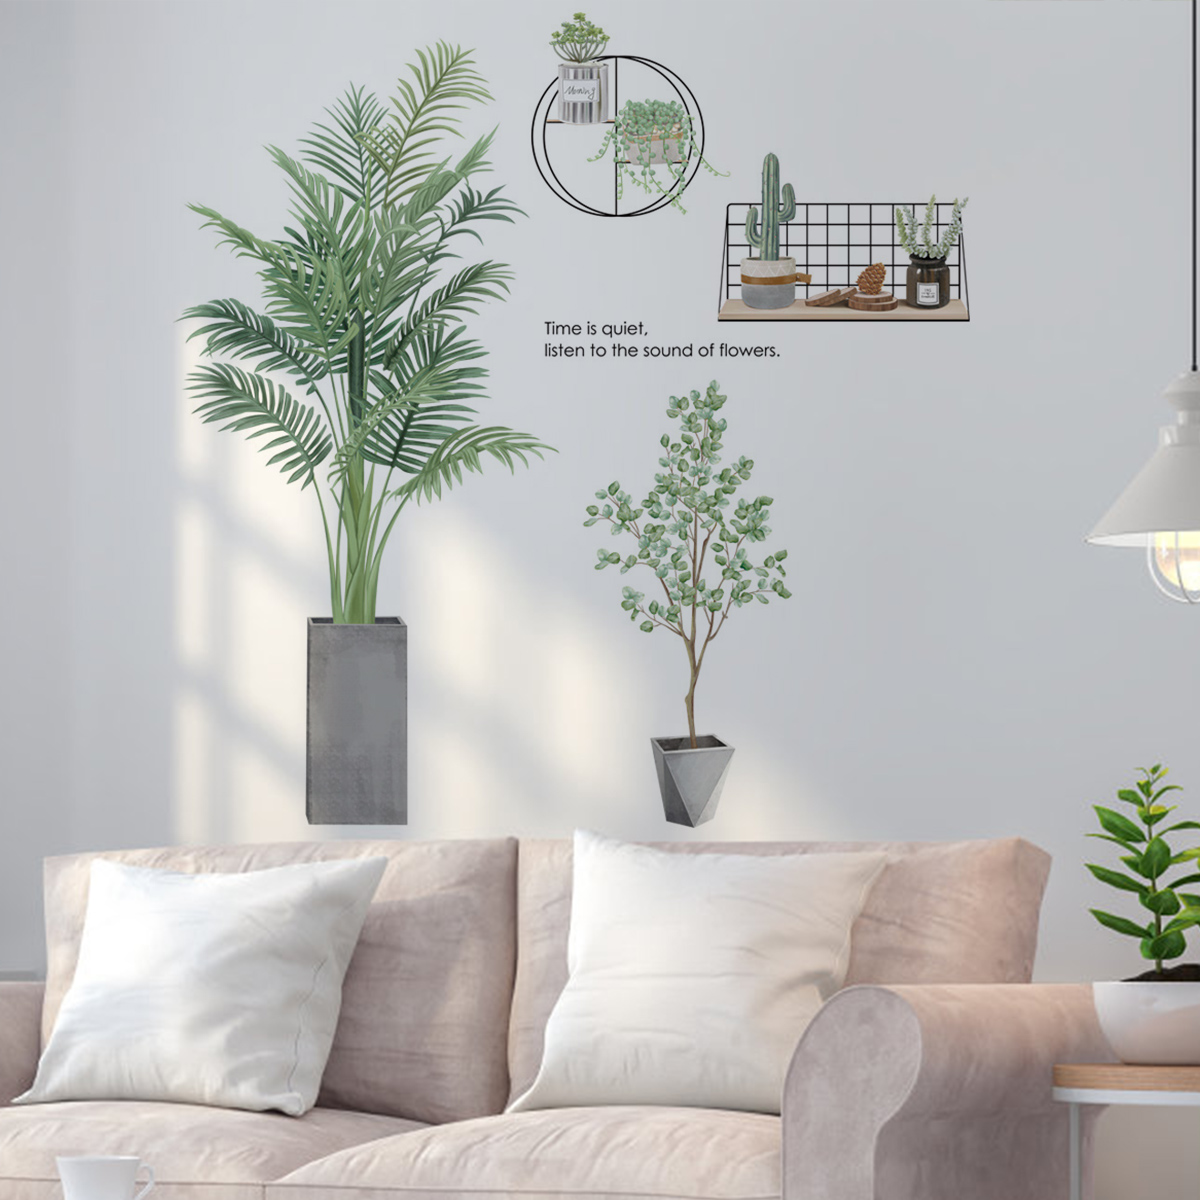 Green-Leaves-Wall-Stickers-Waterproof-Removable-Wall-Decal-Home-Office-Living-Room-Bedroom-Wall-Deco-1774850-1